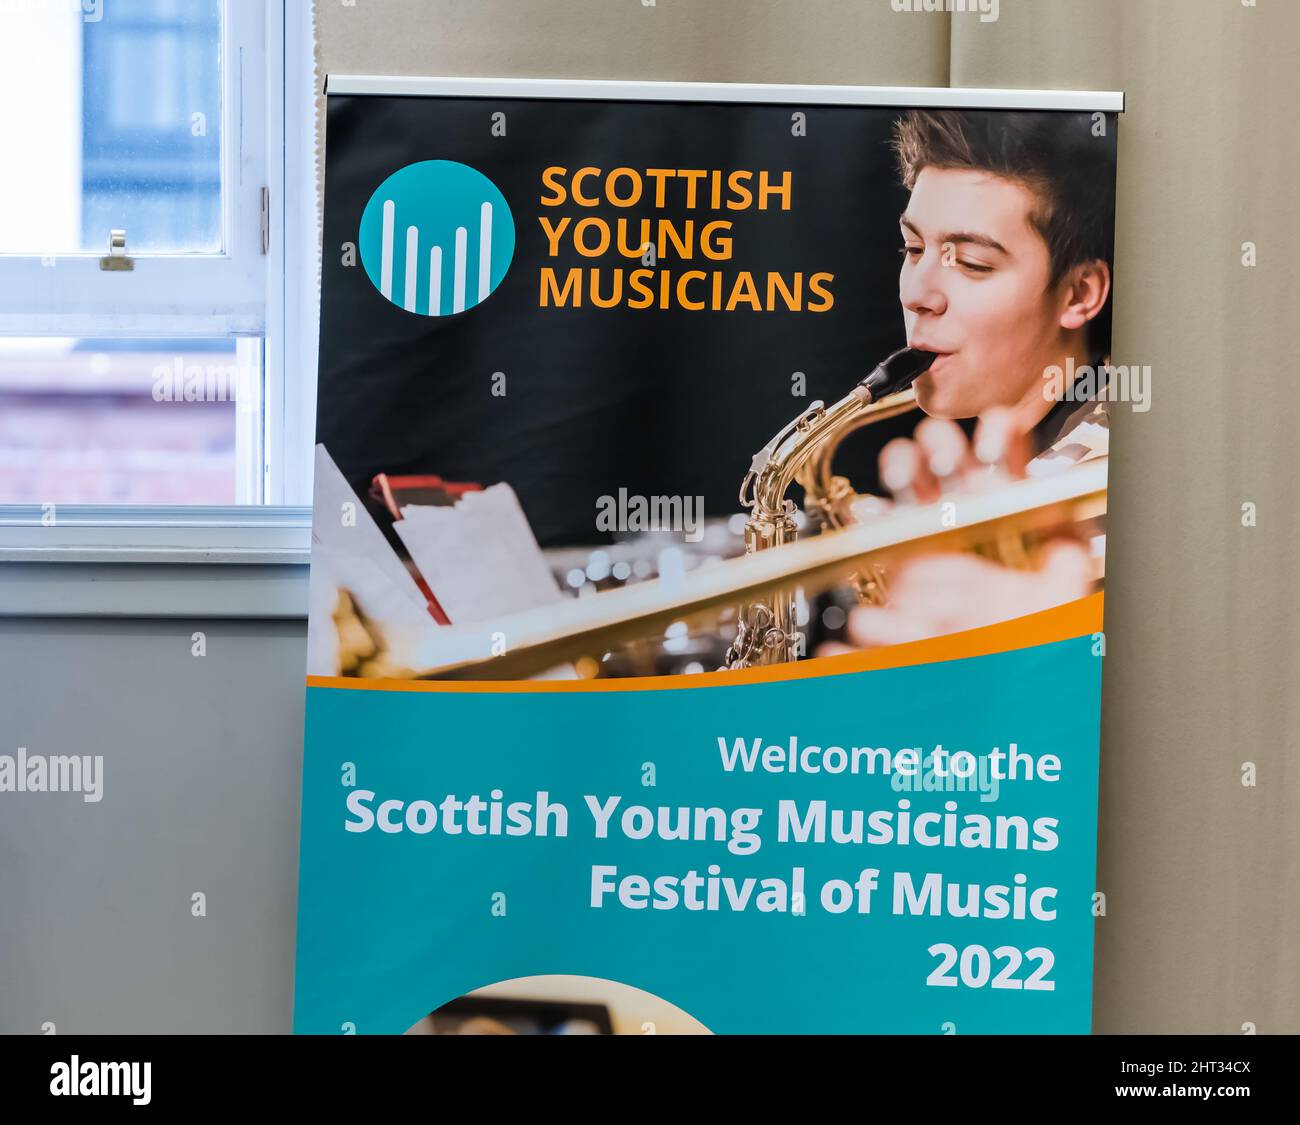 Poster for Scottish Young Musicians Festival of Music competition in 2022 Stock Photo